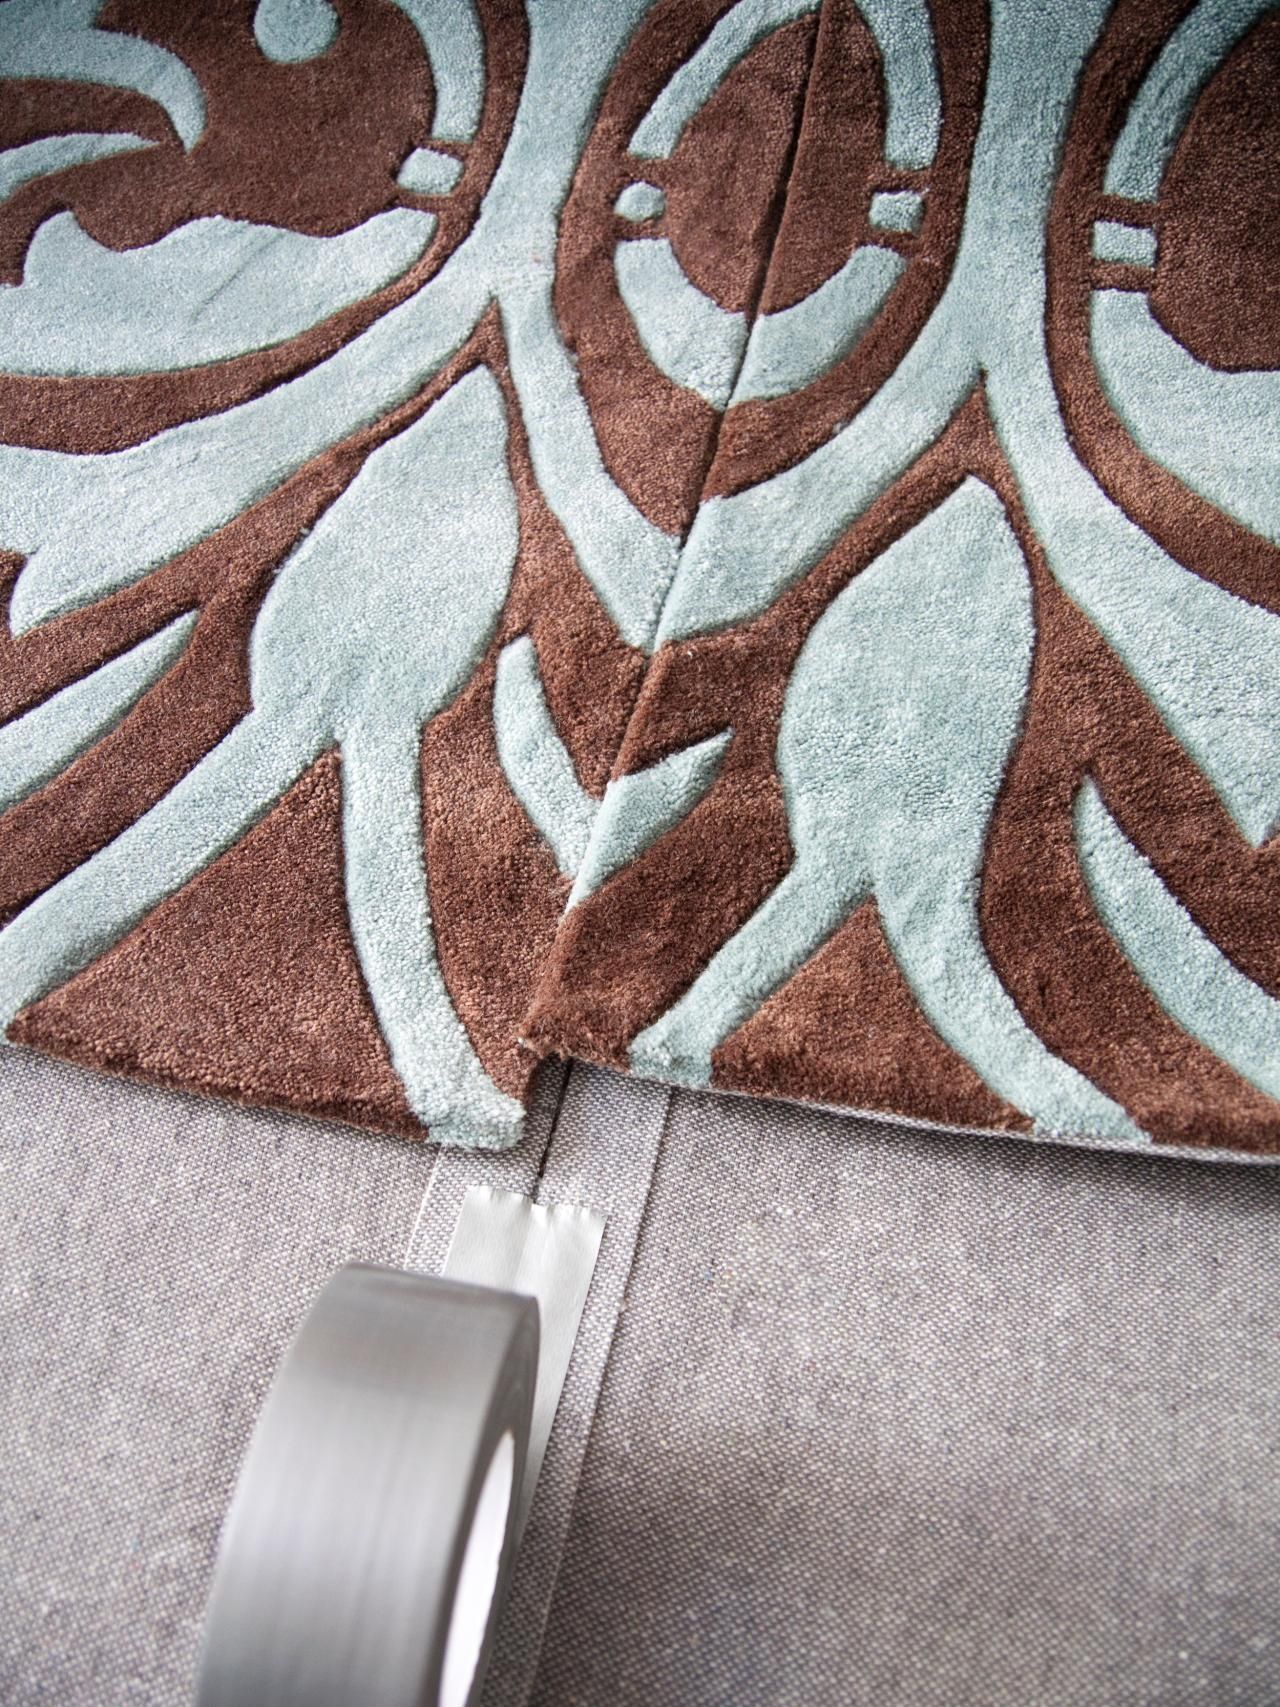 How To Make One Large Custom Area Rug From Several Small Ones Hgtv For Custom Rugs (View 14 of 15)